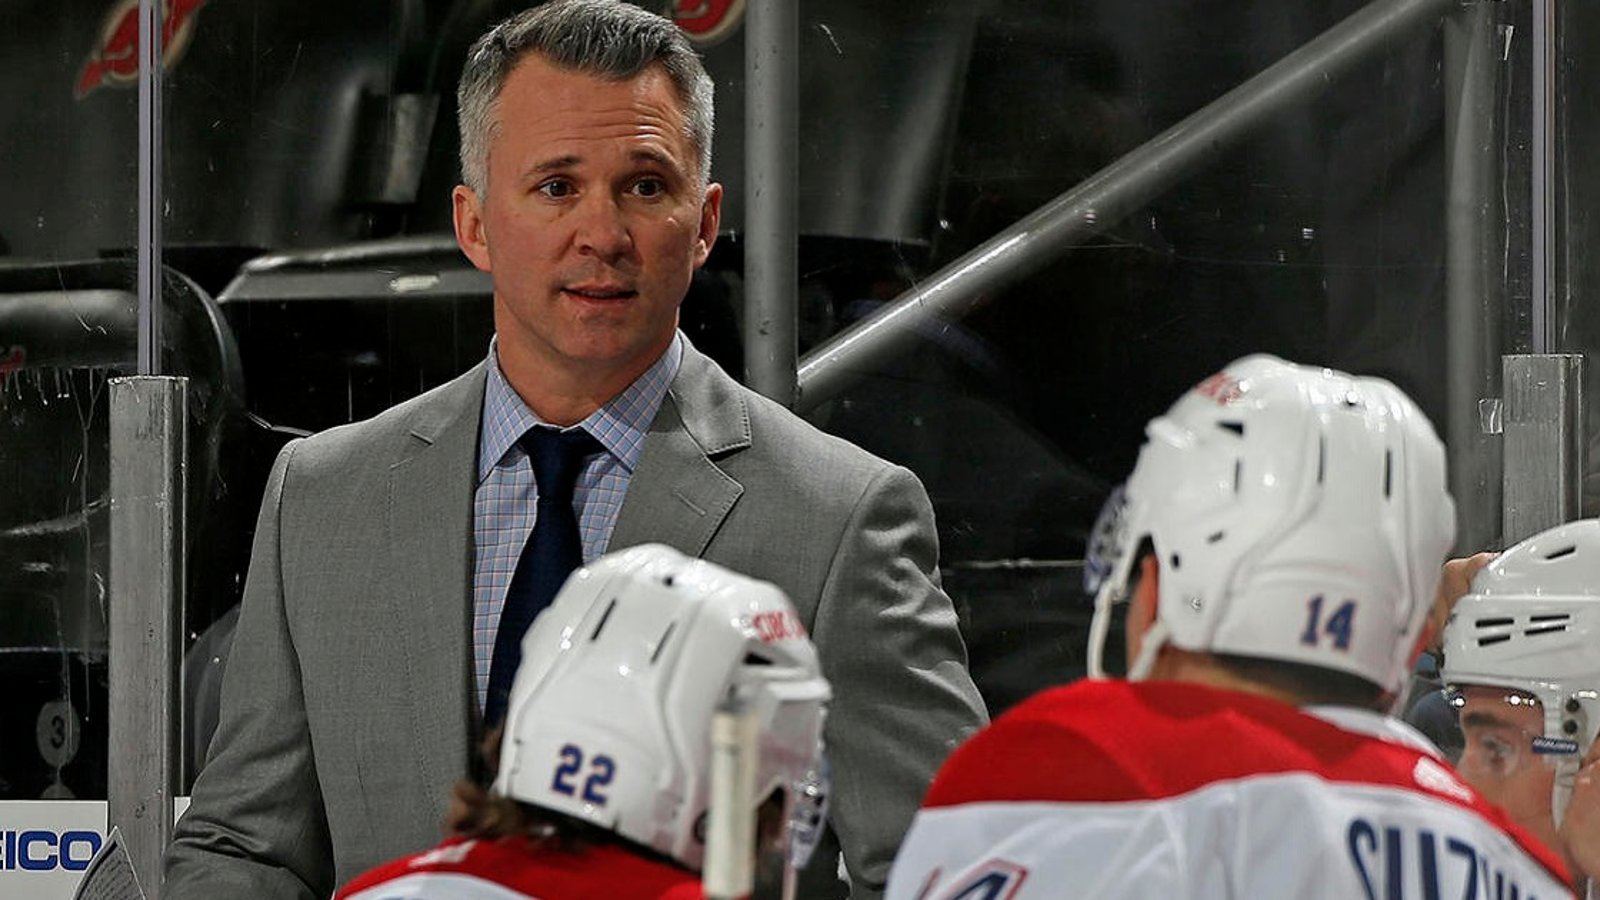 Habs player leaks details about Martin St. Louis' absence.